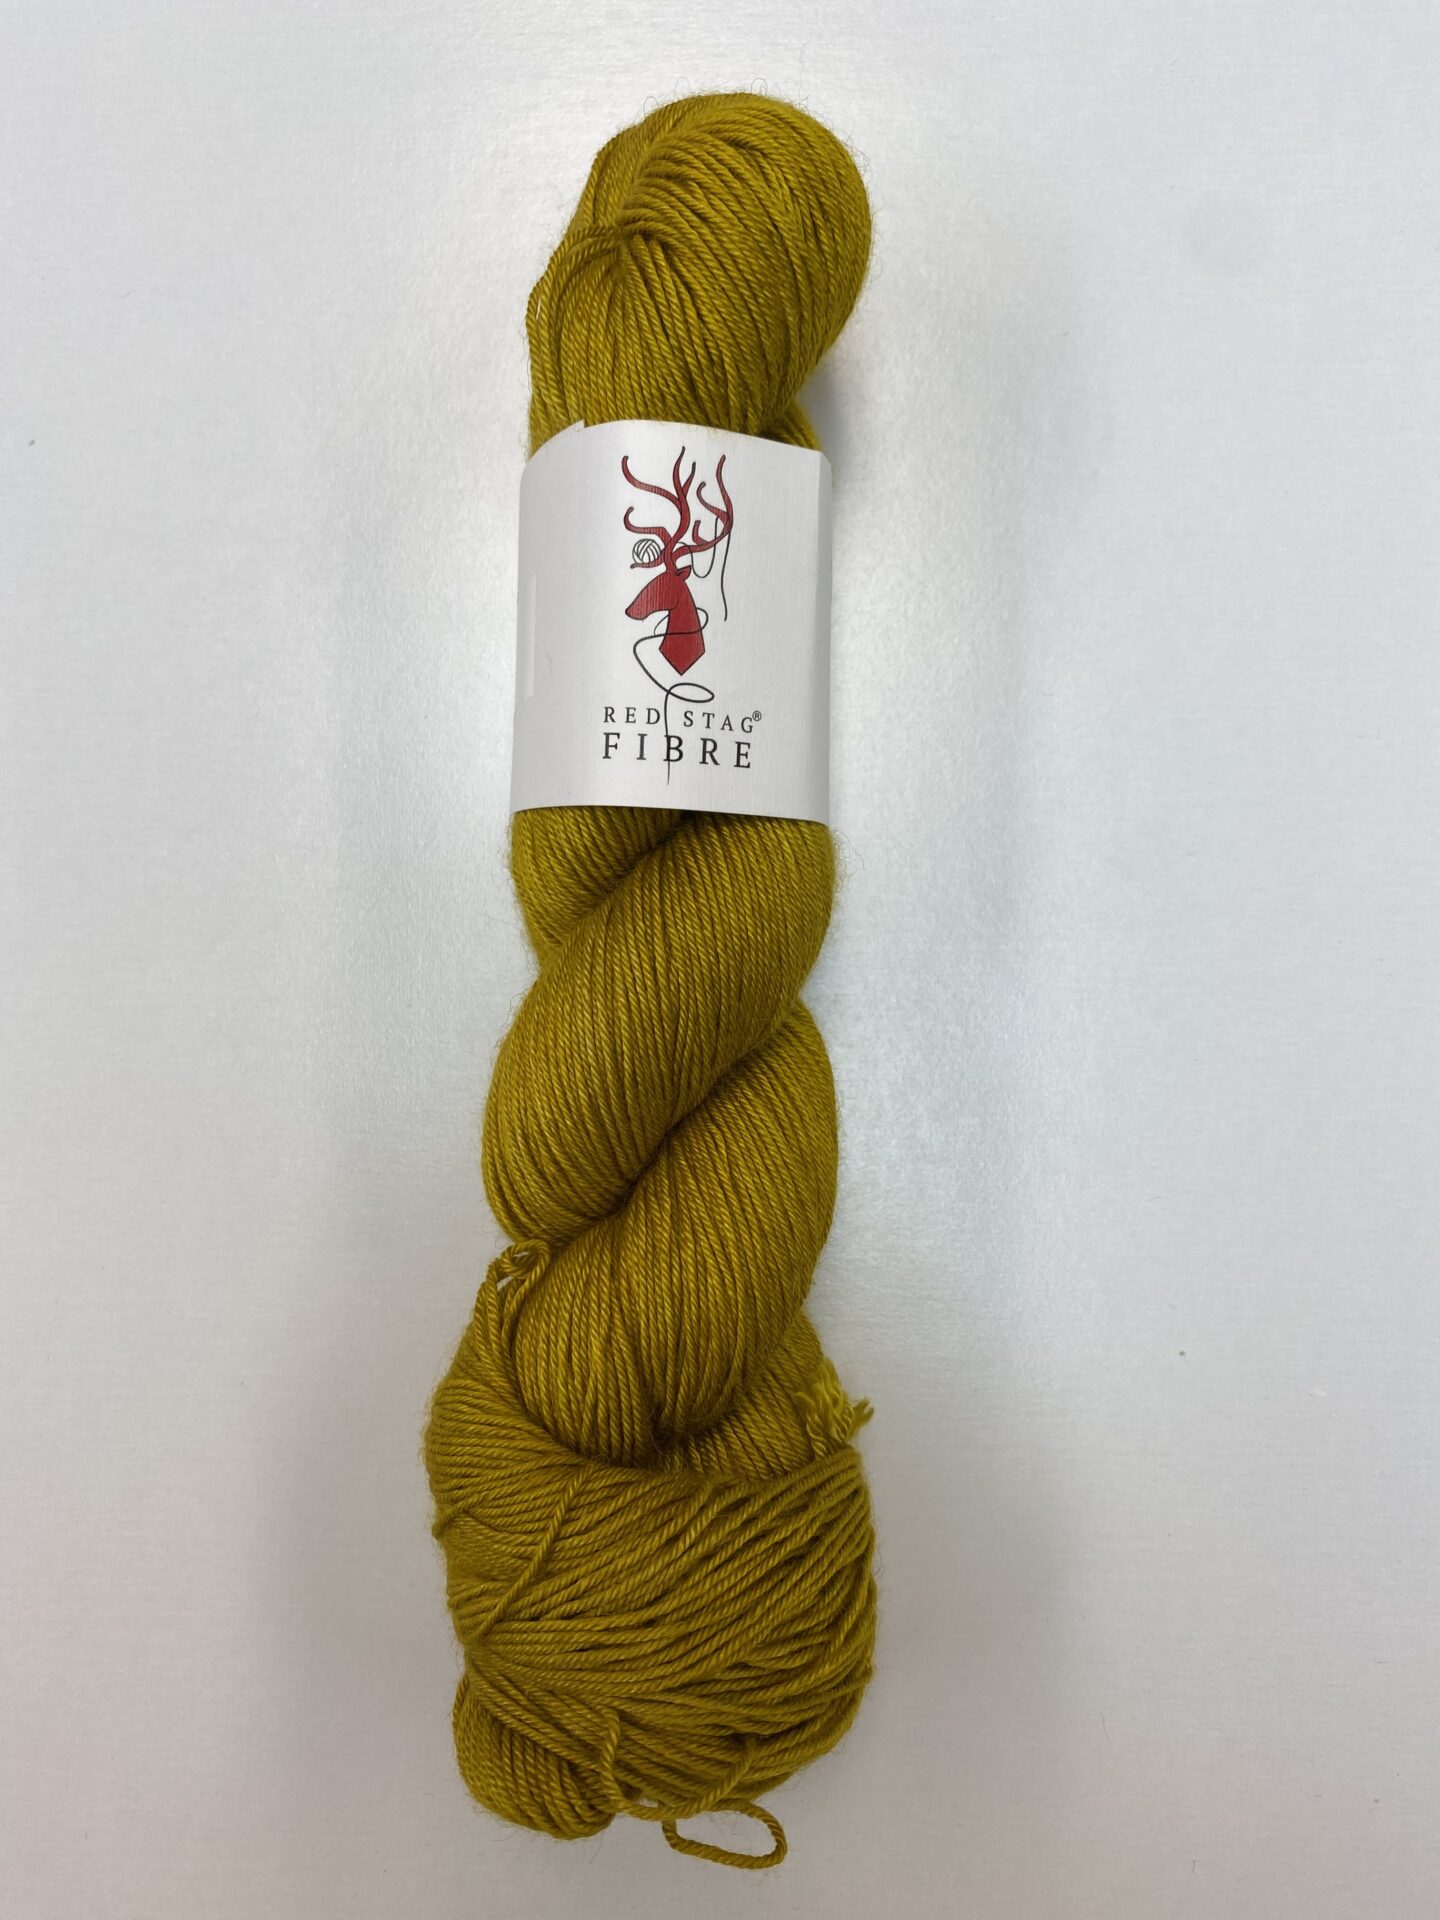 A Bundle of Red Stag Fibre Wool in Yellow